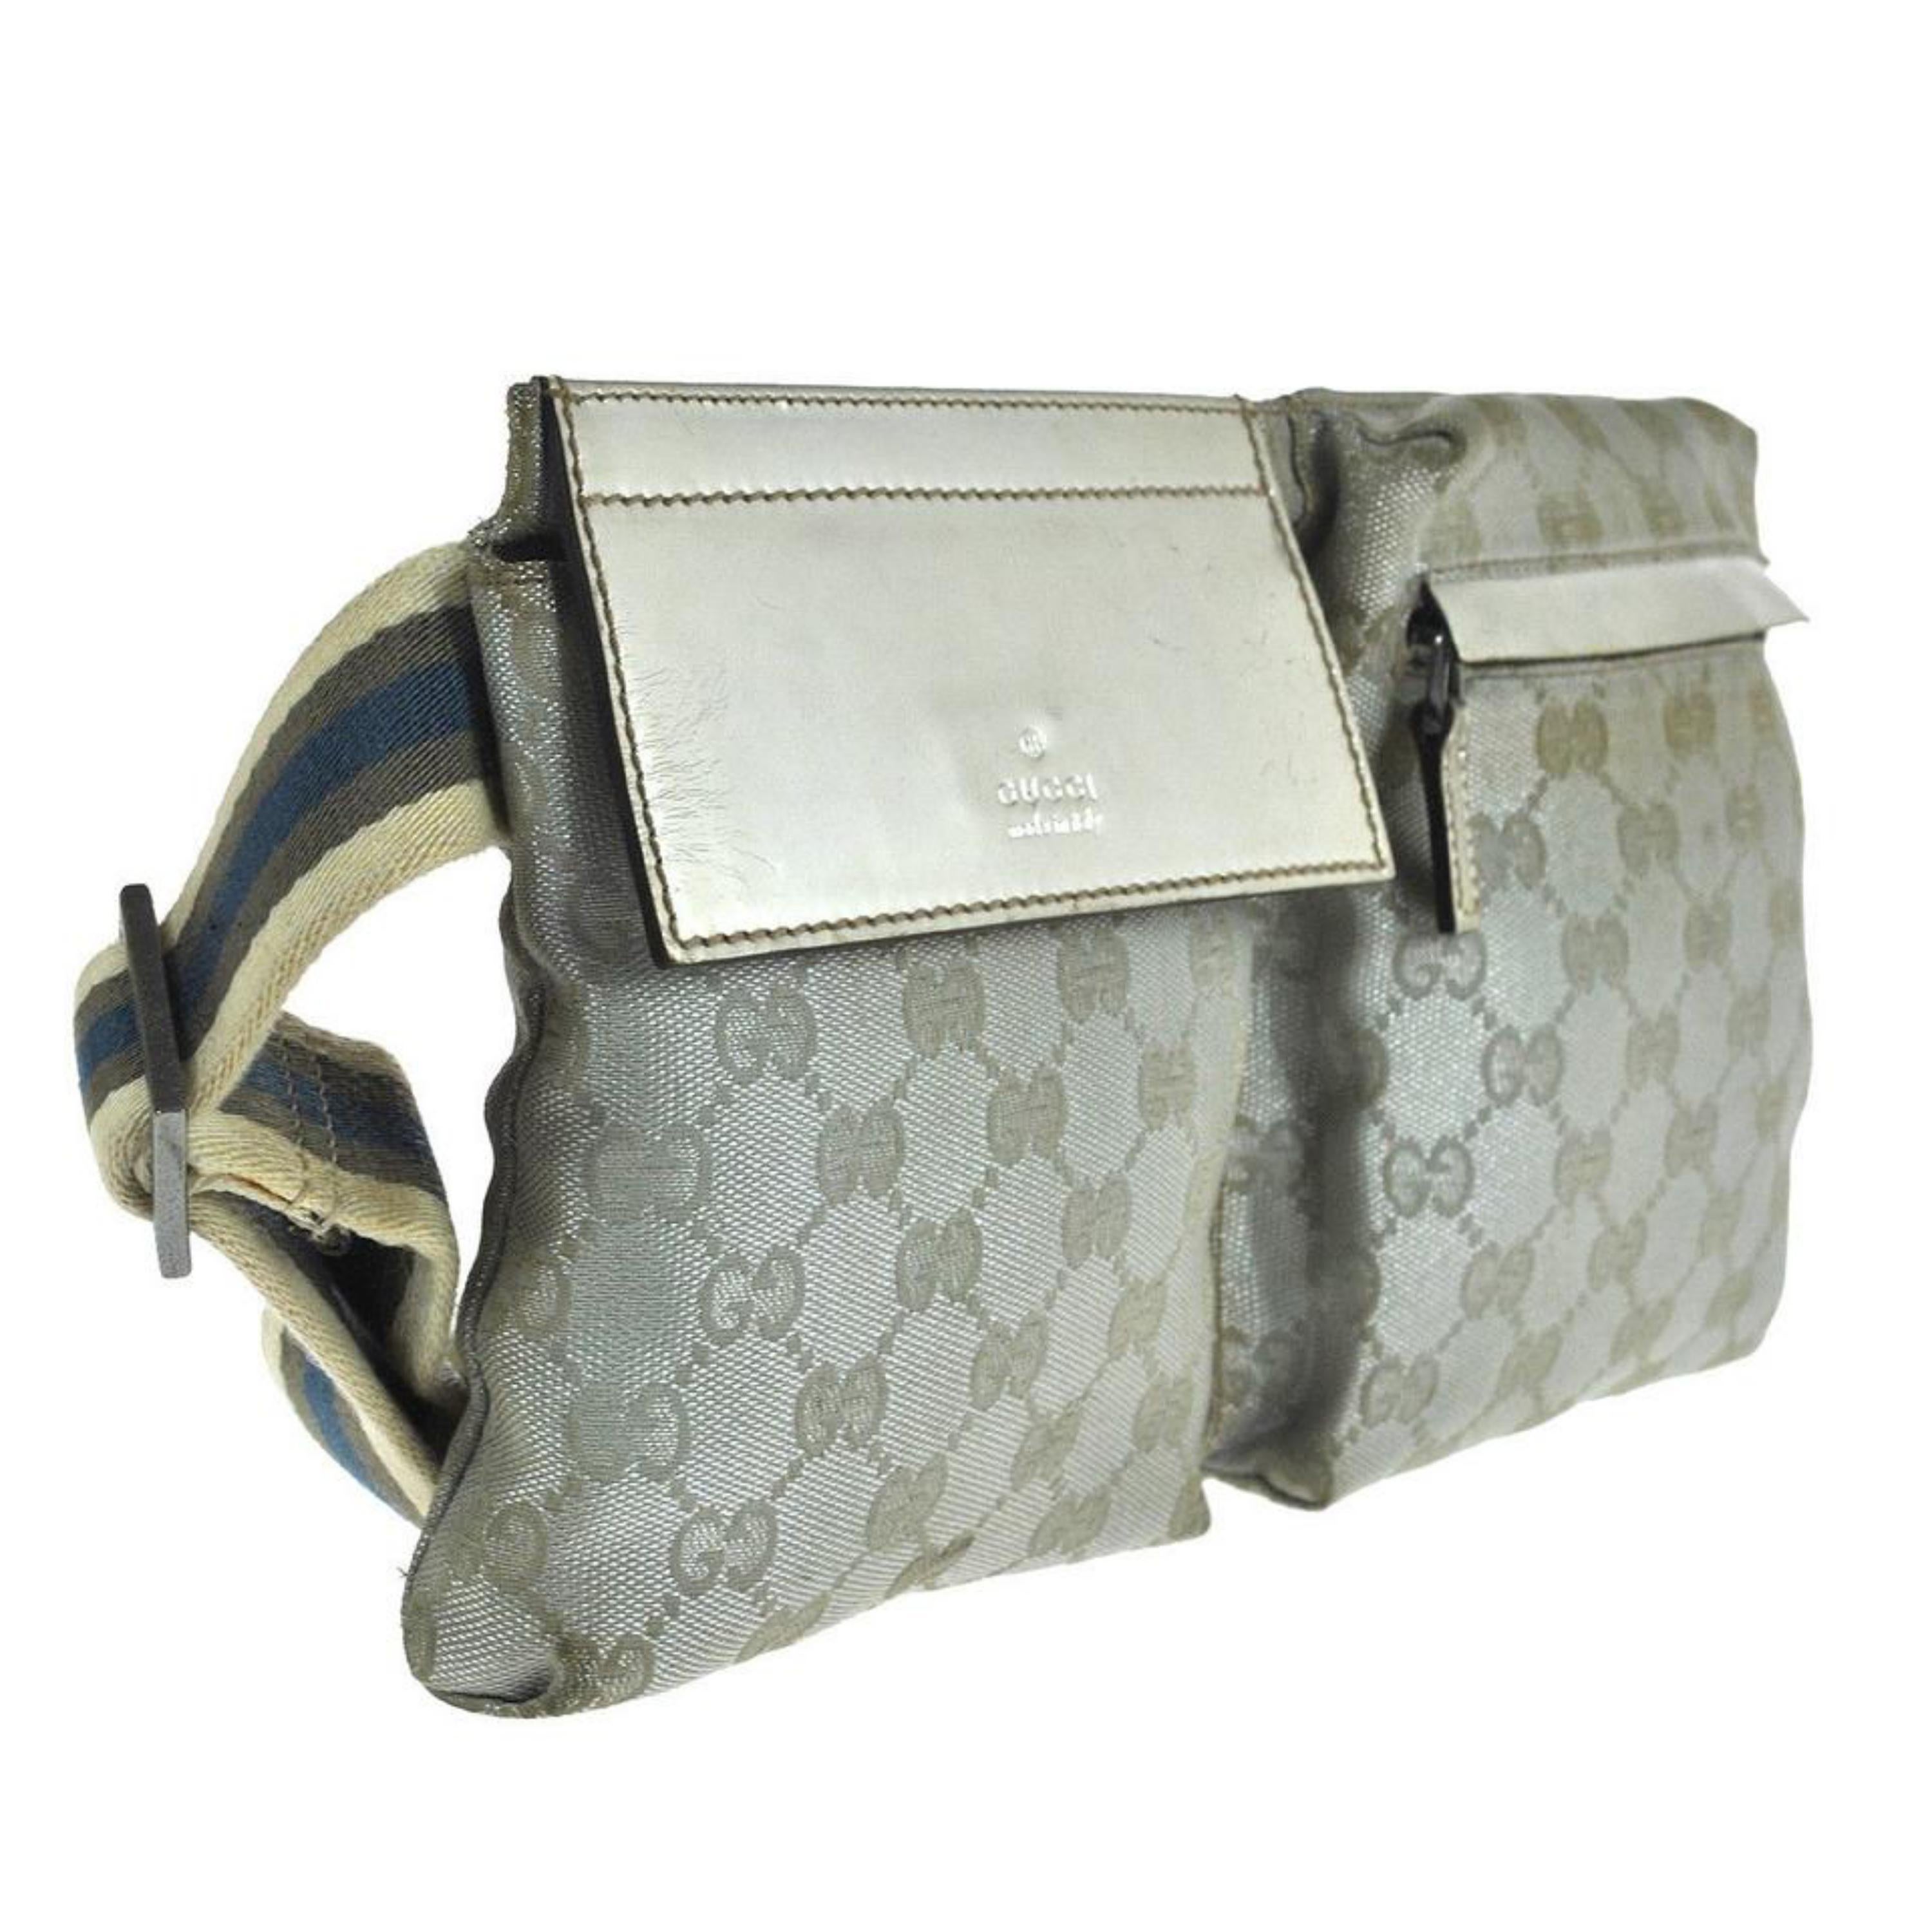 BRAND:Gucci
SKU Number:A56
Number:28566 497717
Size (Inch): W 11.4 